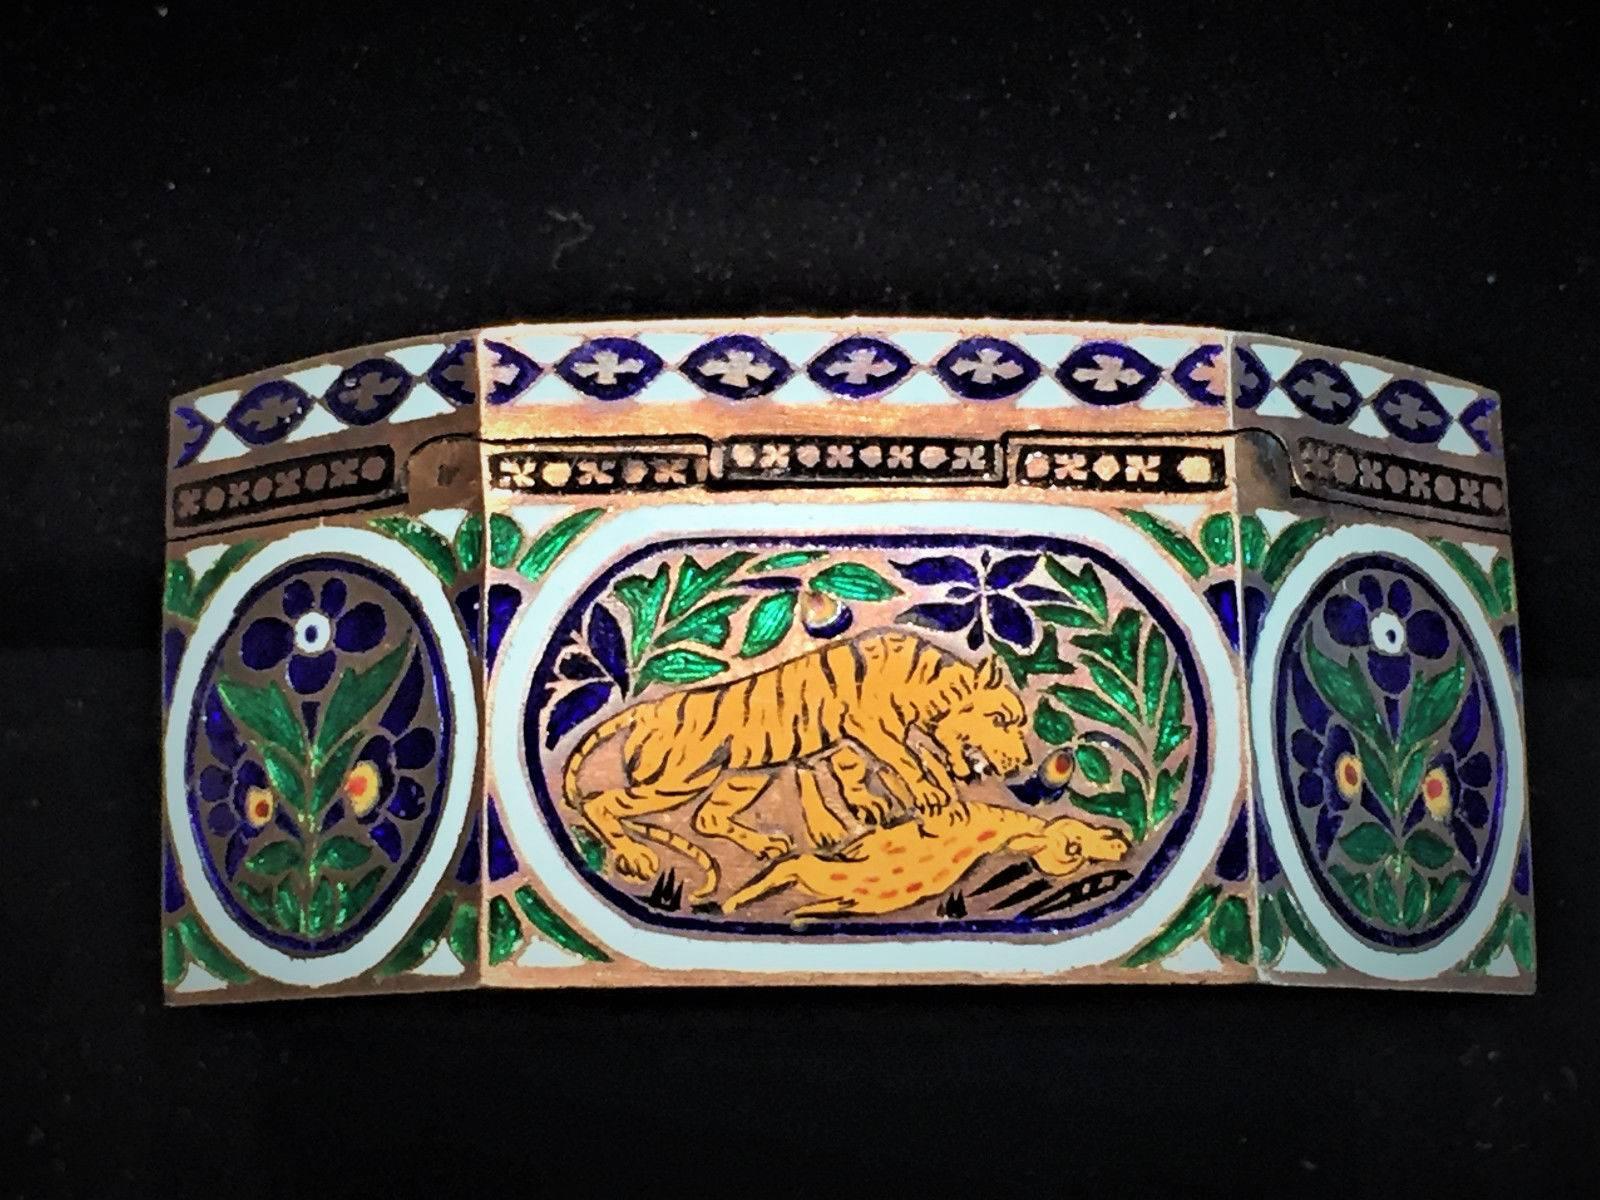 Late 19th Century Antique Indian Enameled Silver Snuffbox with Hunting Scenes, circa 1890s